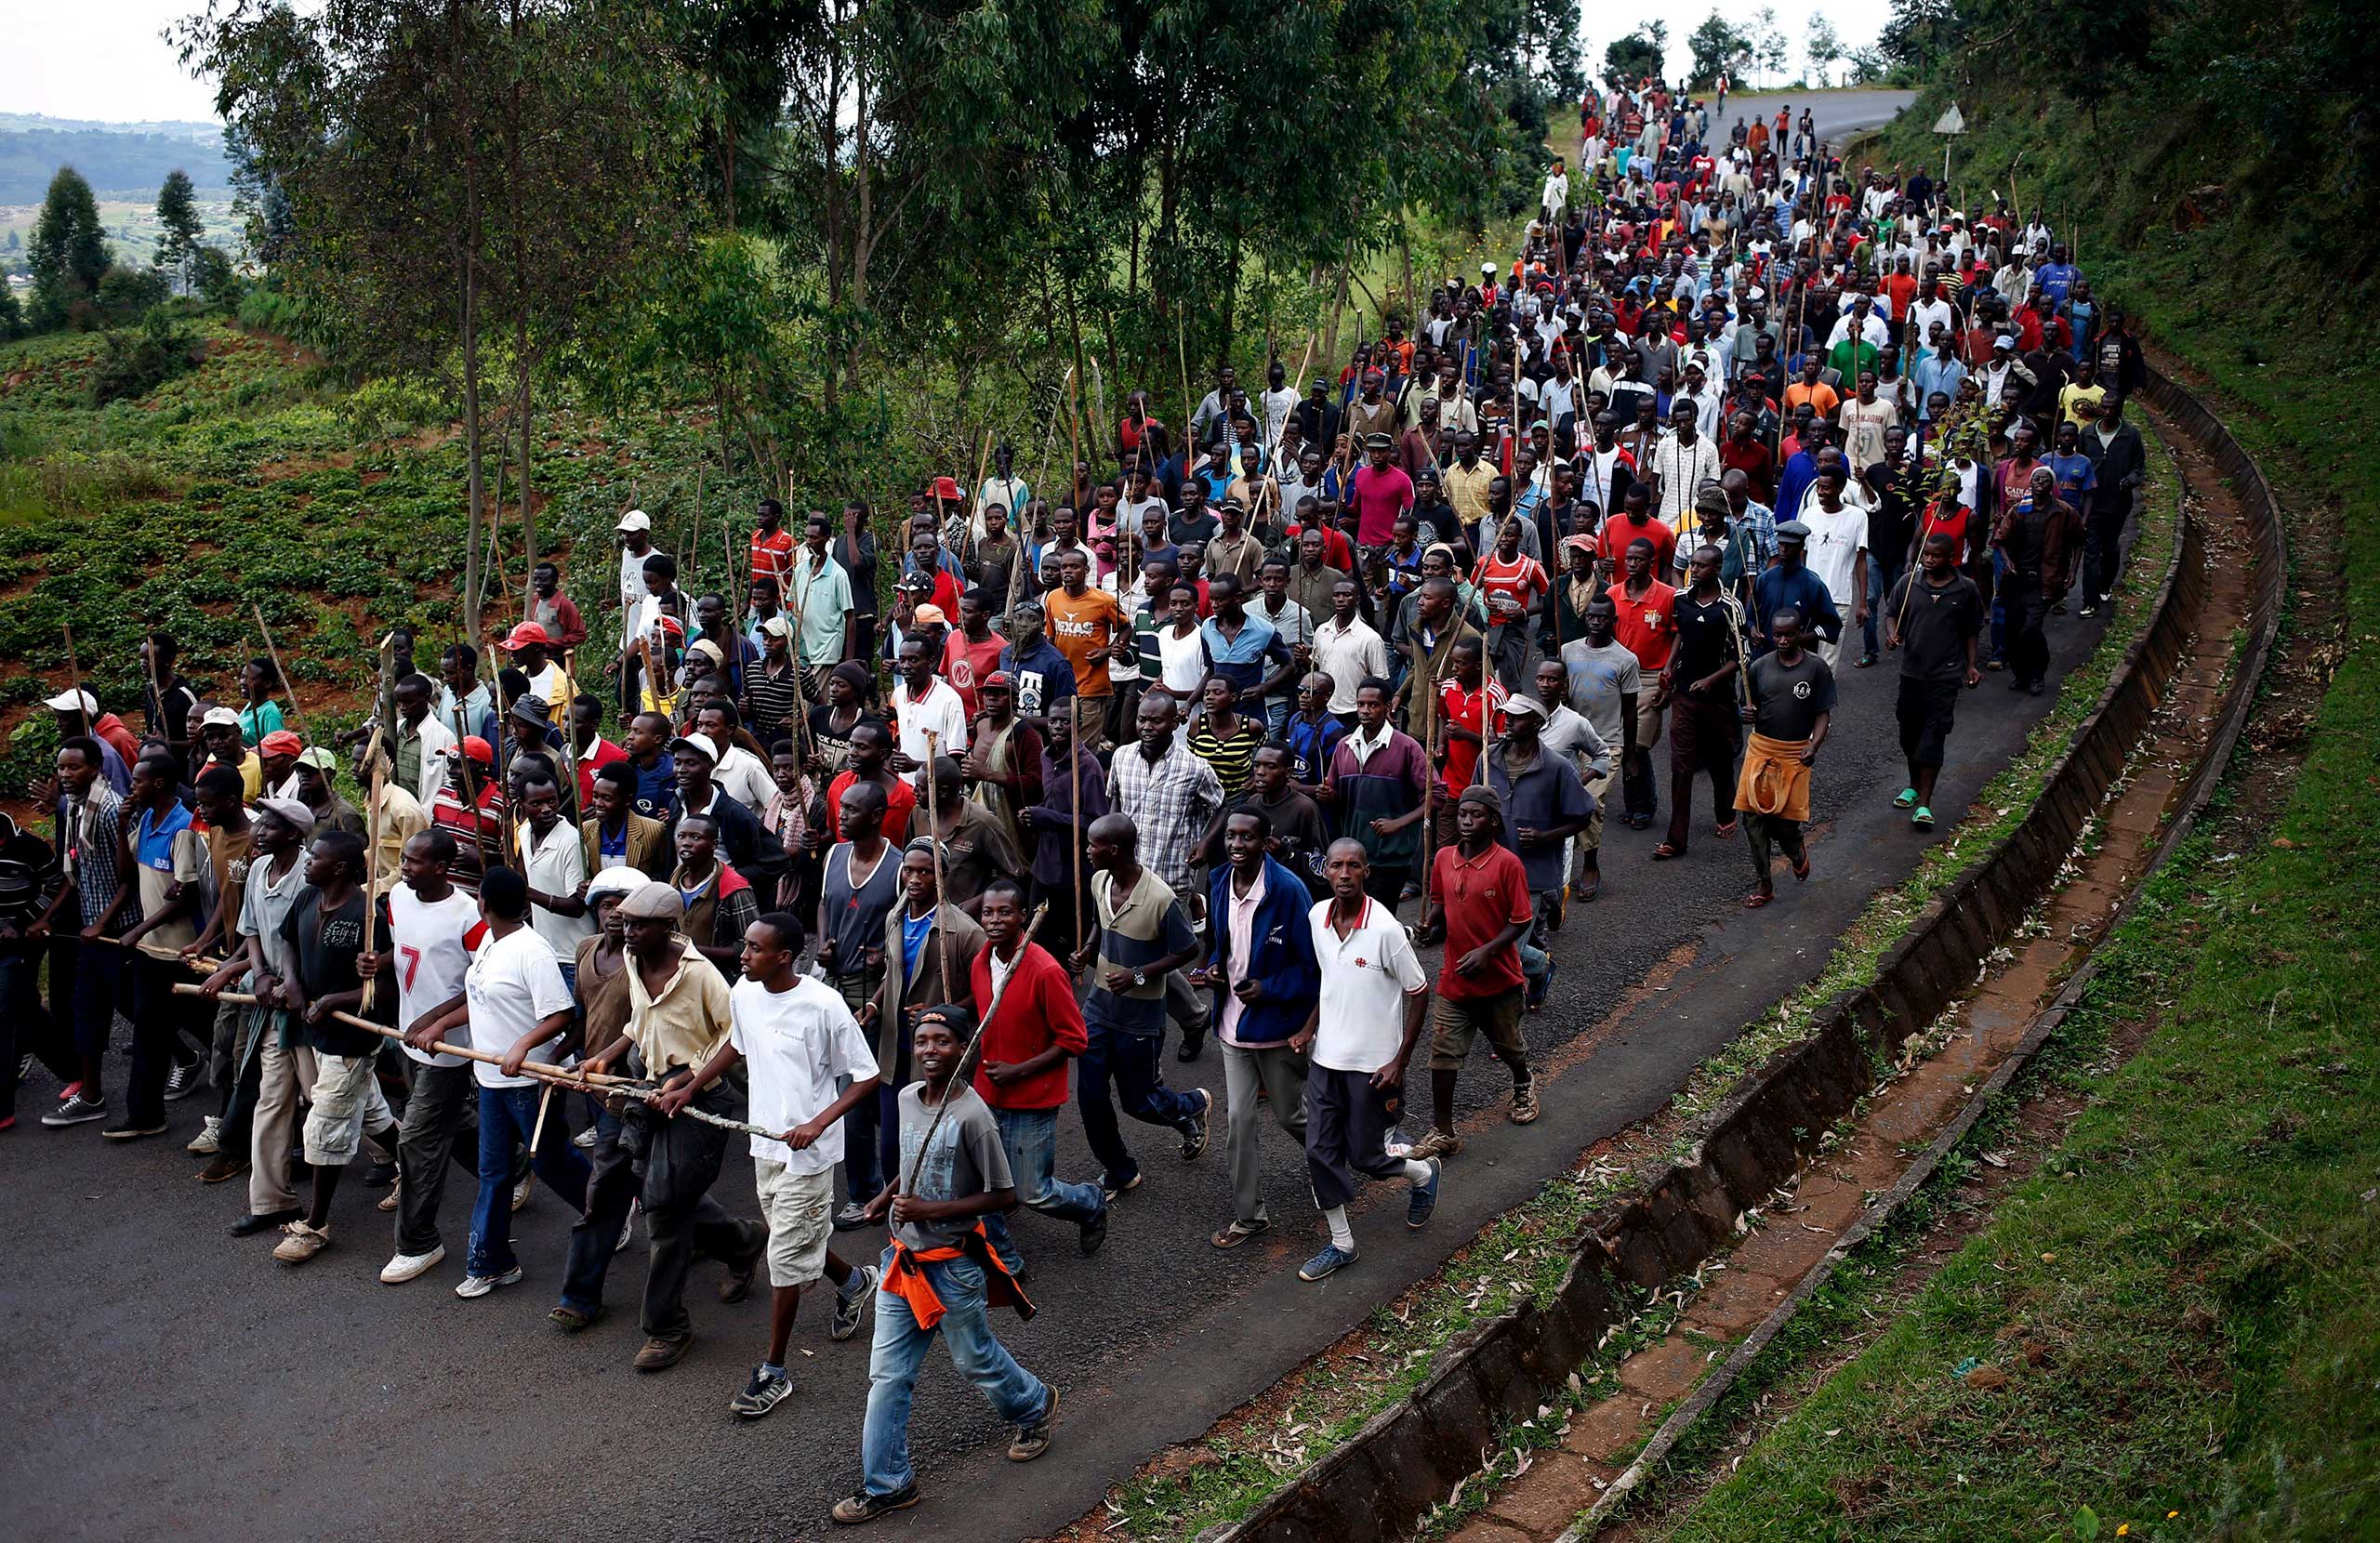 Protesters against President Pierre Nkurunziza and his bid for a third term march towards the town of Ijenda, Burundi, June 3, 2015. The election, resulting in a disputed win for Nkurunziza, was rocked by violence between his supporters and opponents. (Goran Tomasevic—Reuters)